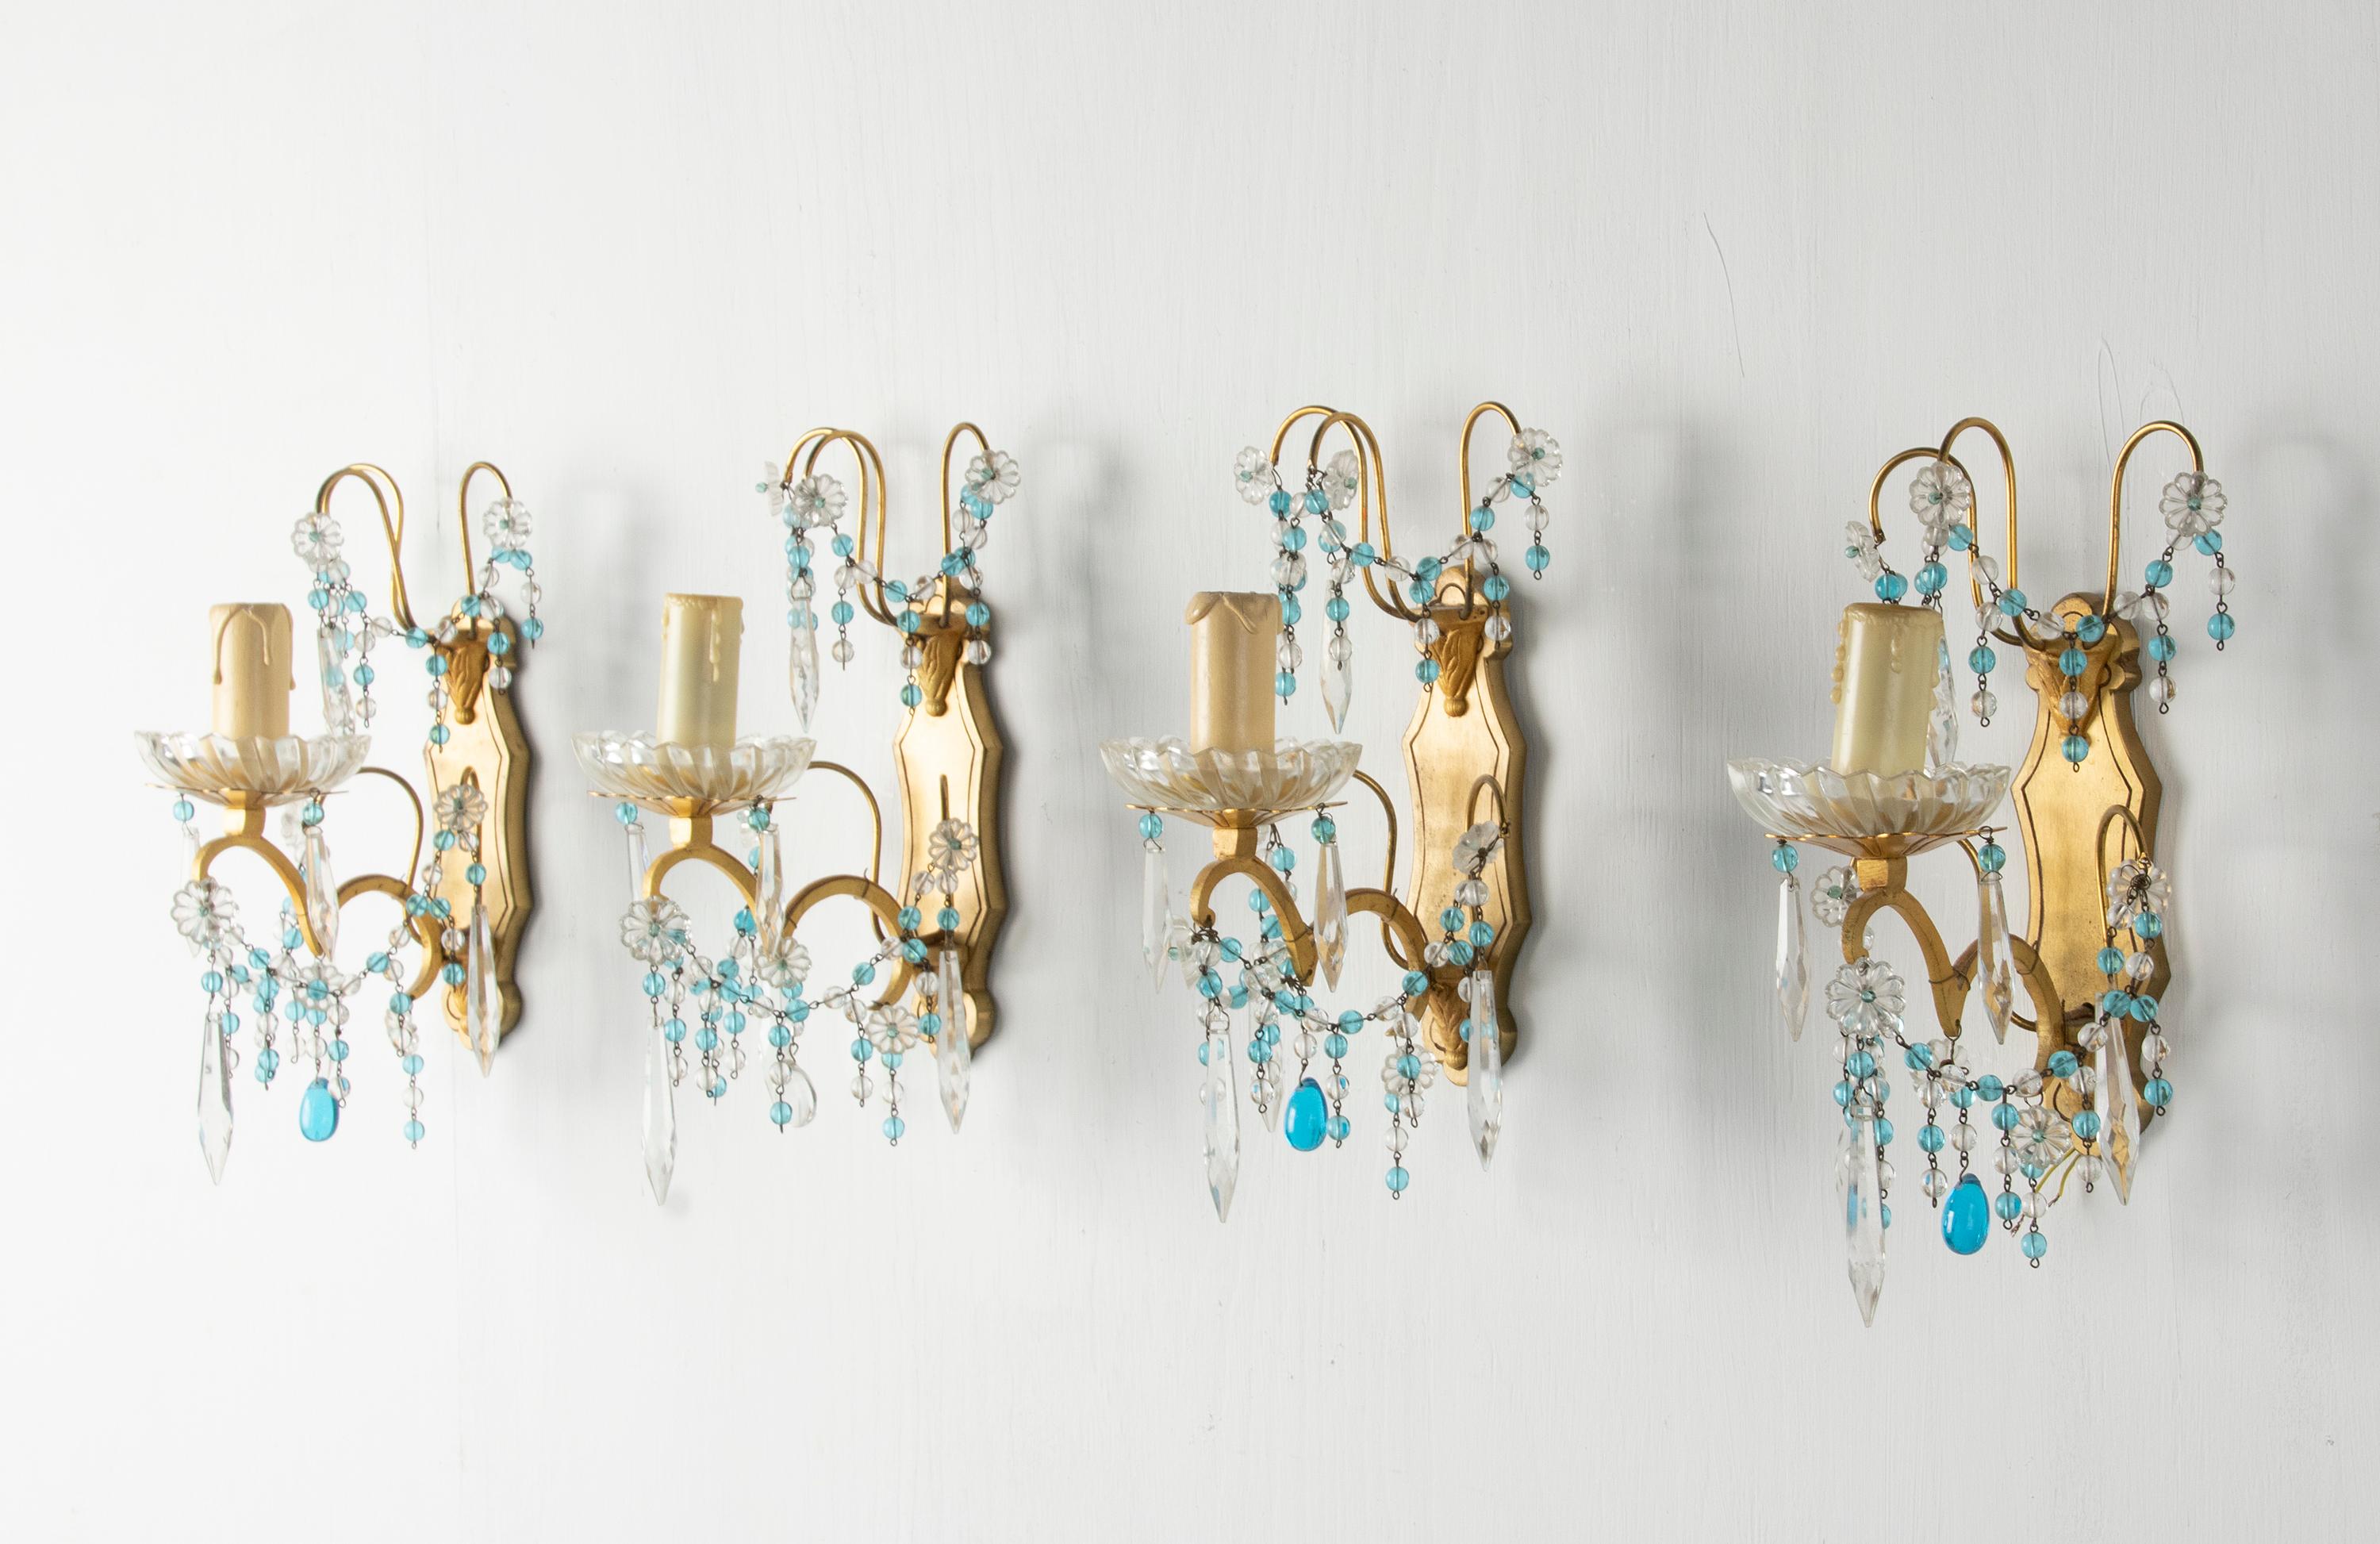 A set of four electrified wall lights. With Murano style glass drops and strings of glass beads. The fixture is made of brass. Each lamp has one fitting for an E14 lightbulb. Made in Italy, circa 1920-1930. All lights have been tested and are in